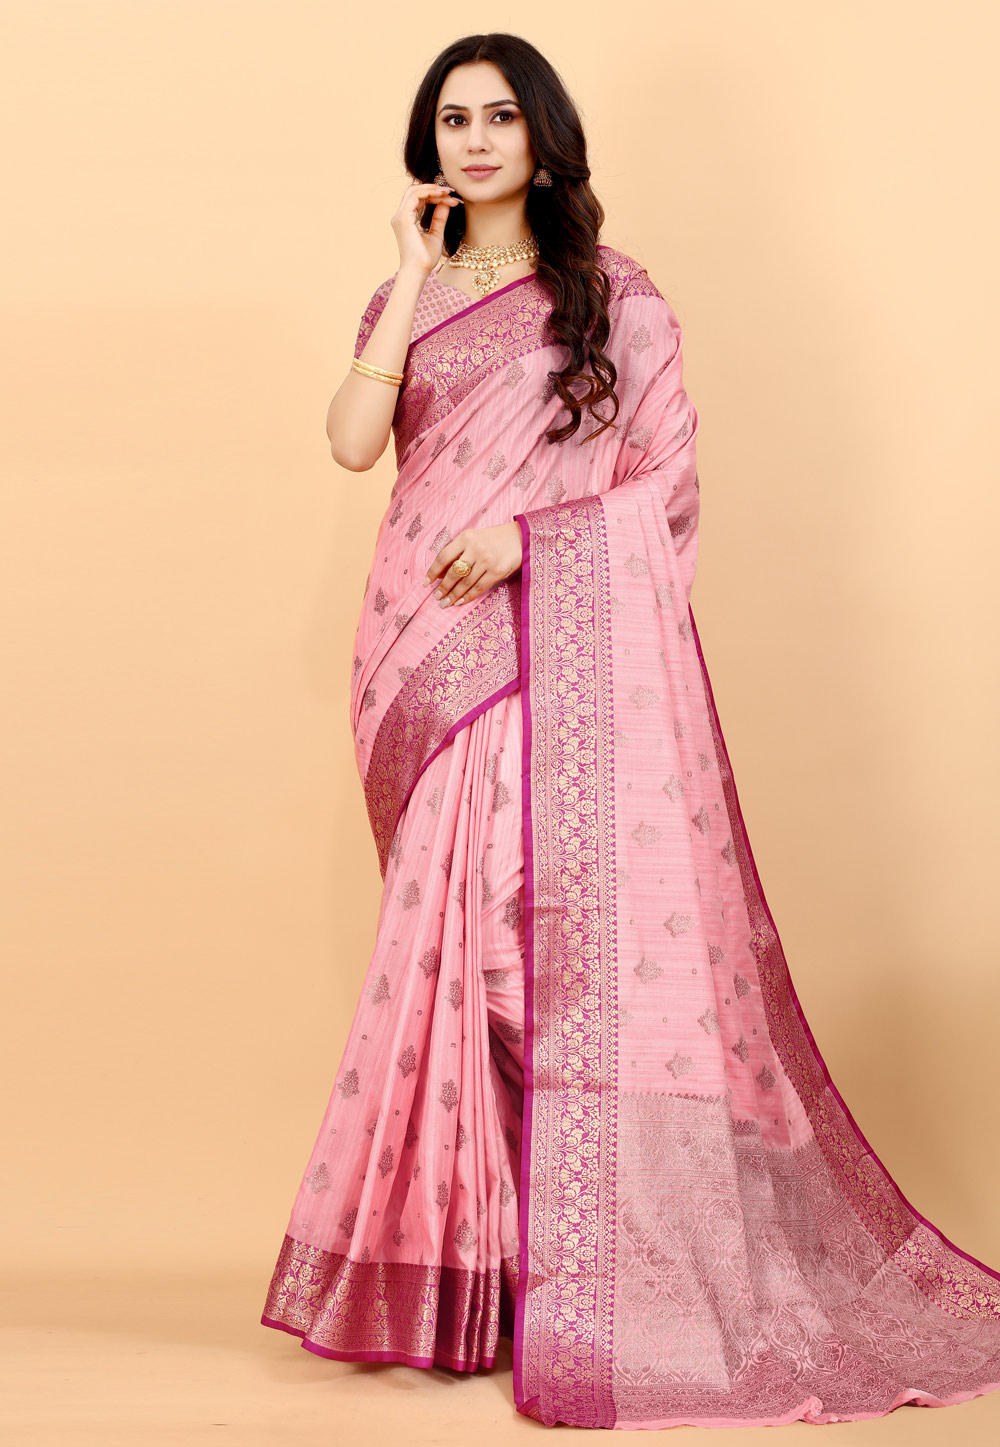 Alluring Women's Multicolor Georgette Light Weight Saree with Lehriya Print  - THE52 - 4283029